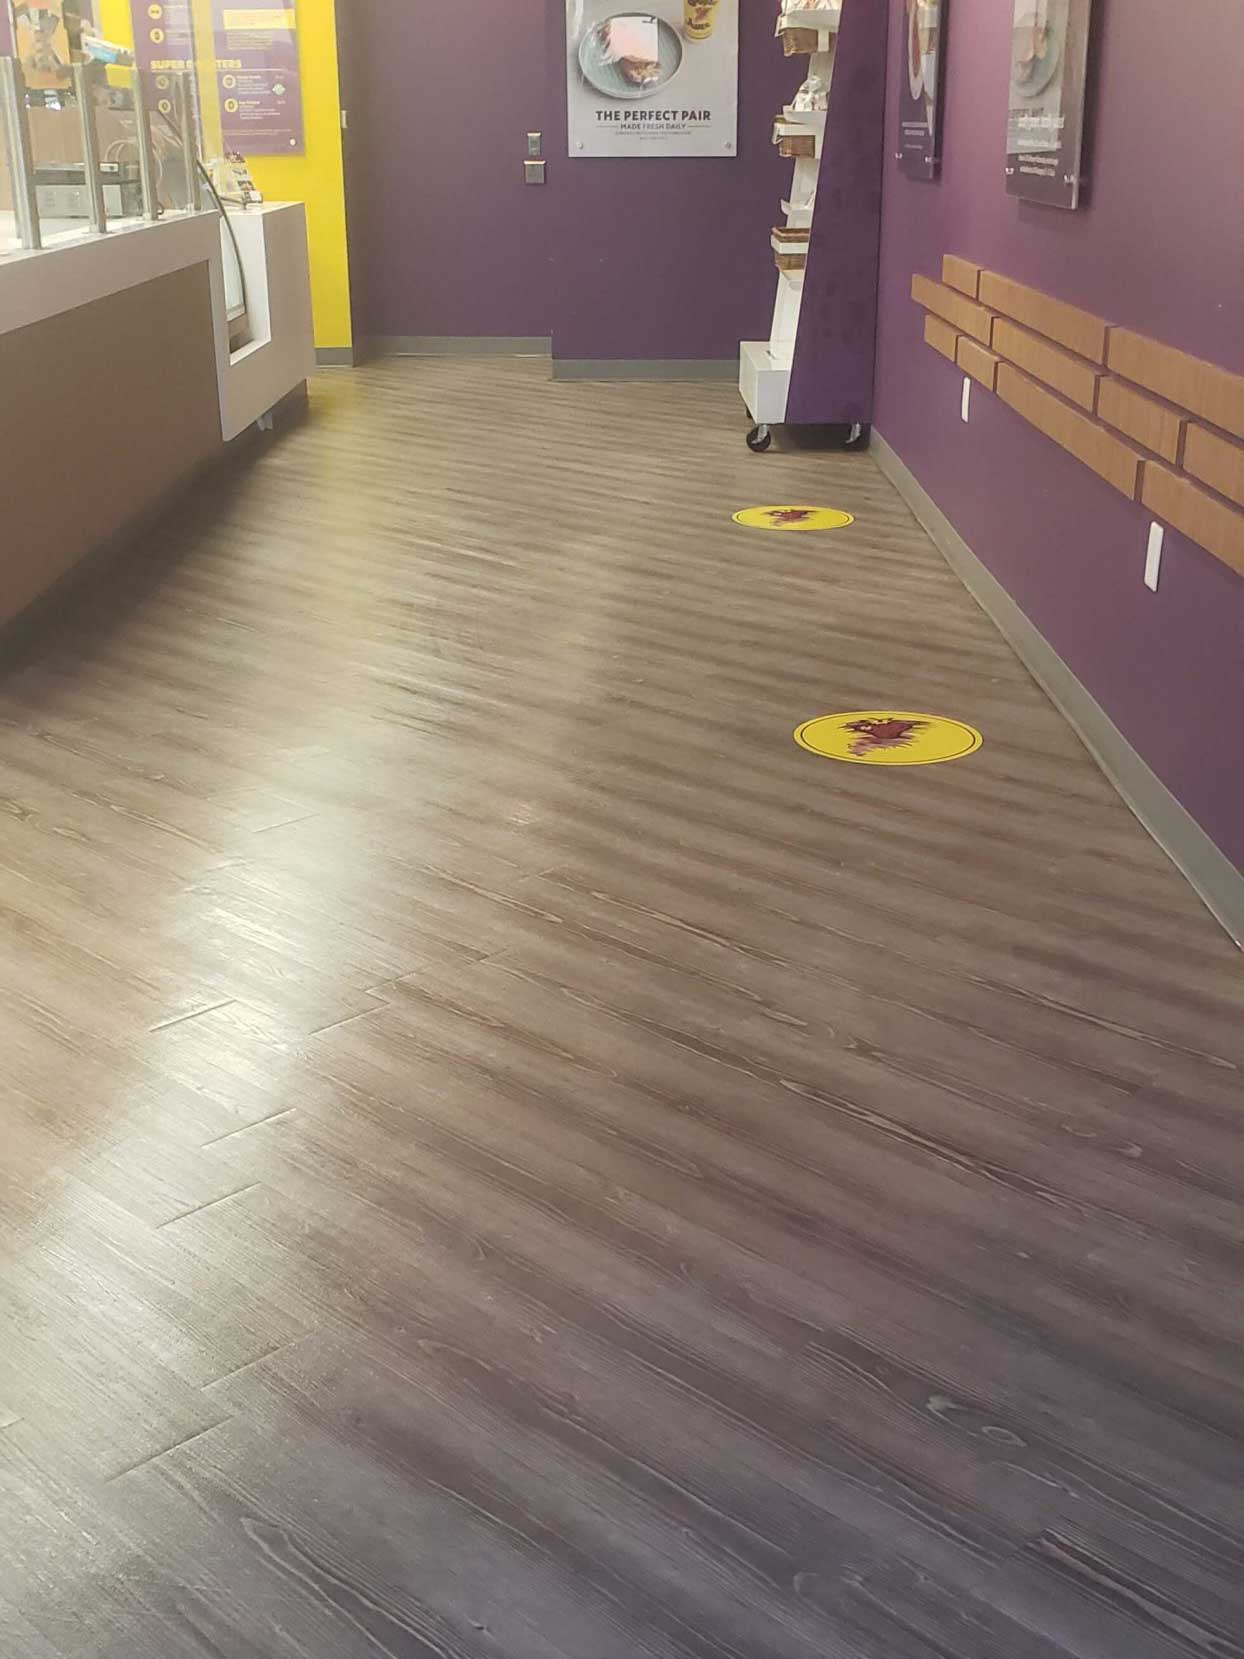 Booster Juice After Cleaning